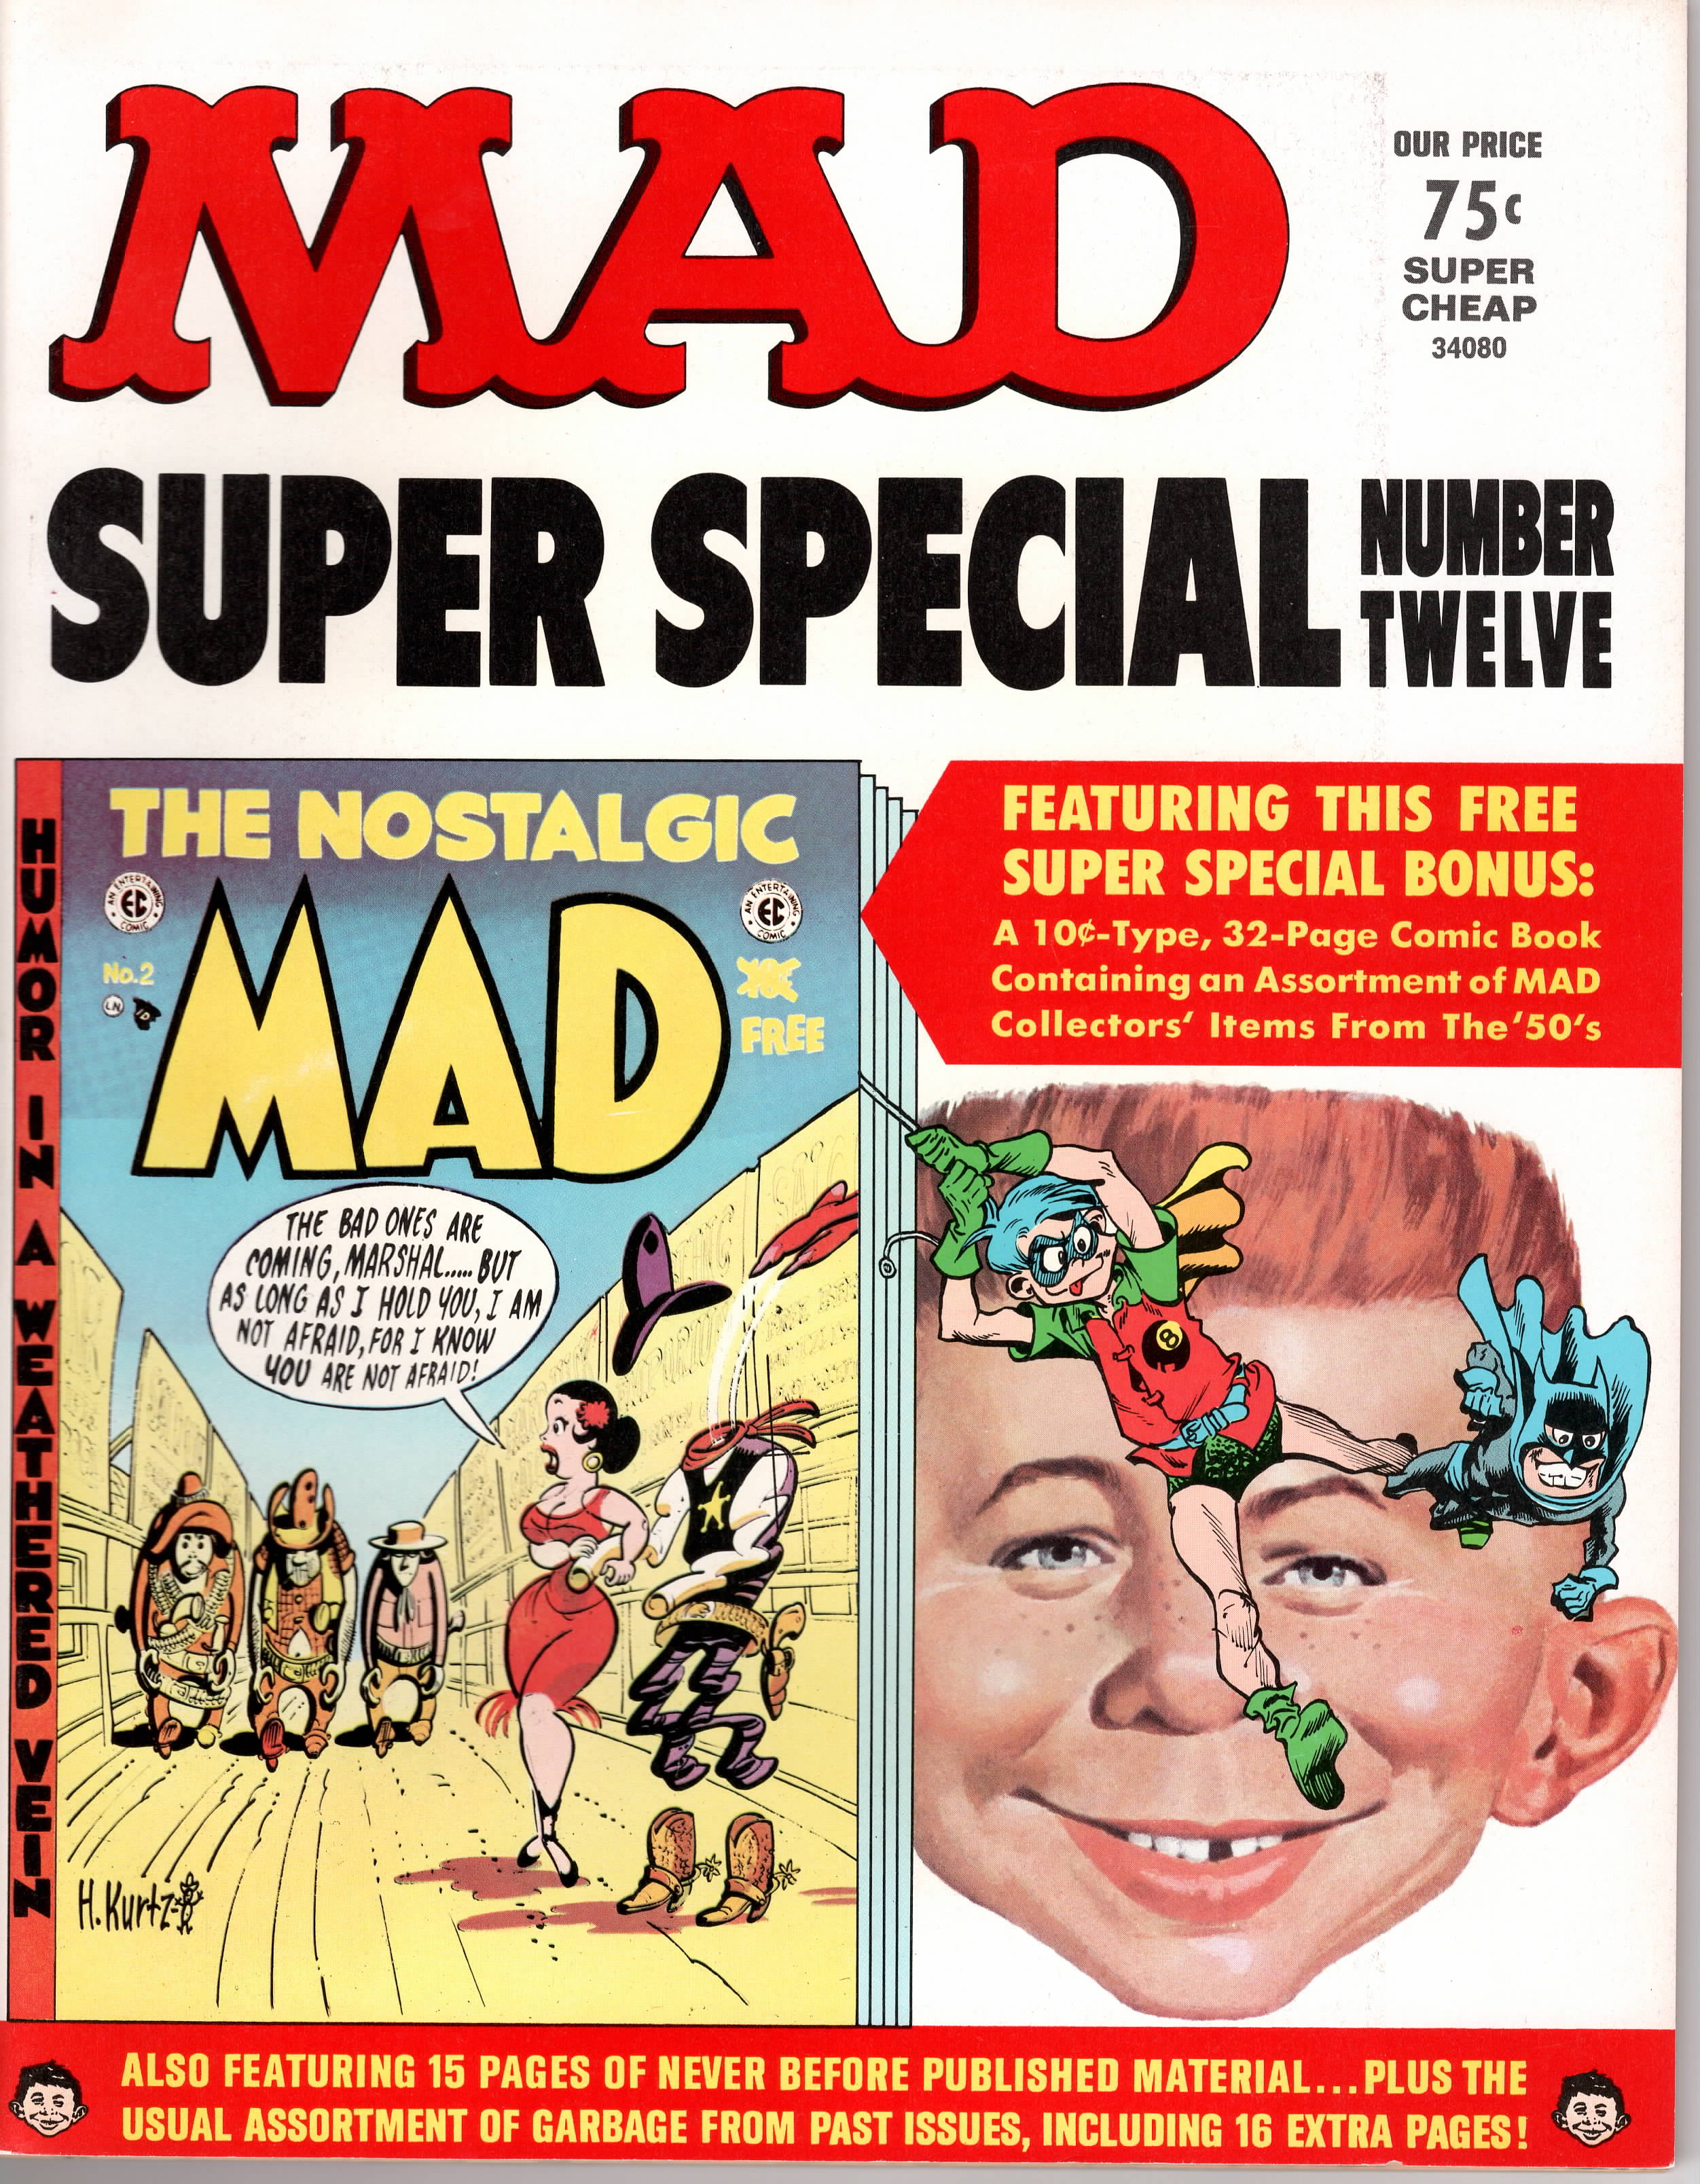 Mad Super Special #12